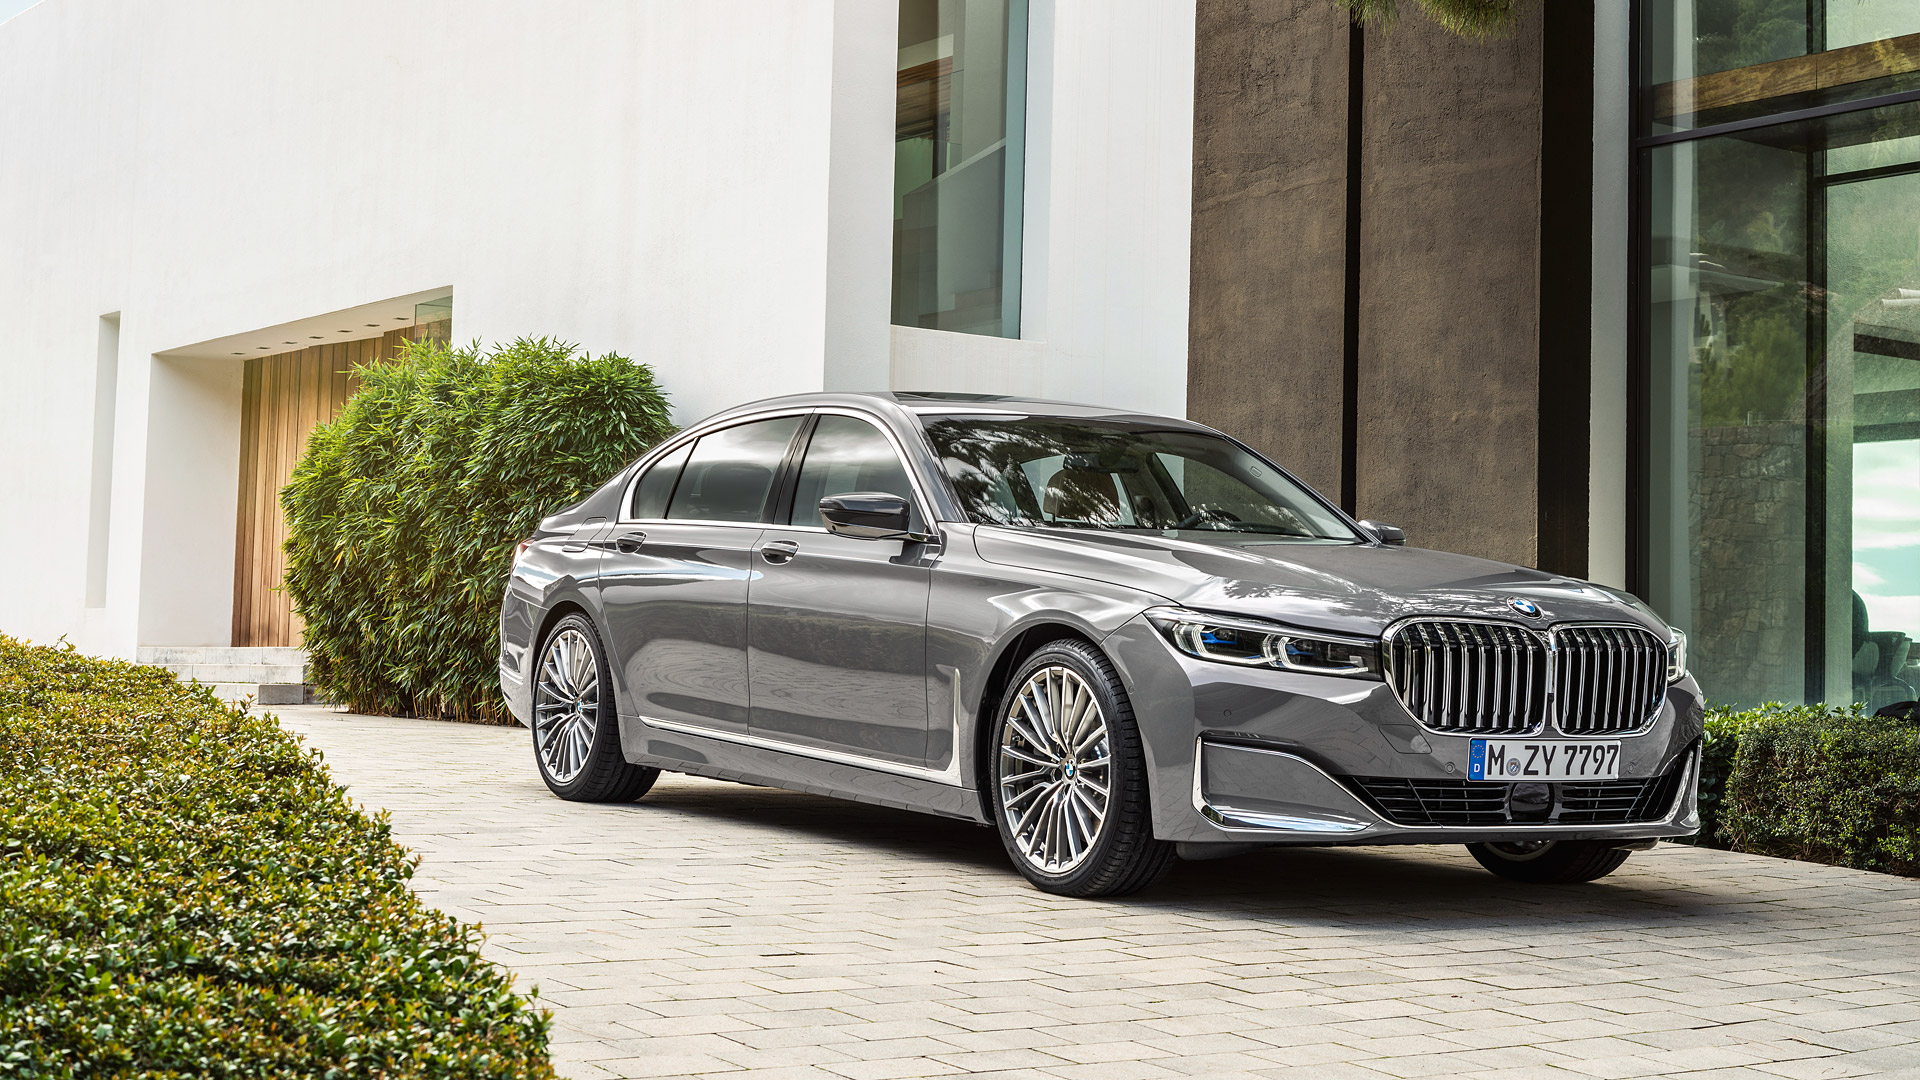 2020 BMW 7 Series Wallpapers Specs Videos   4K HD   WSupercars